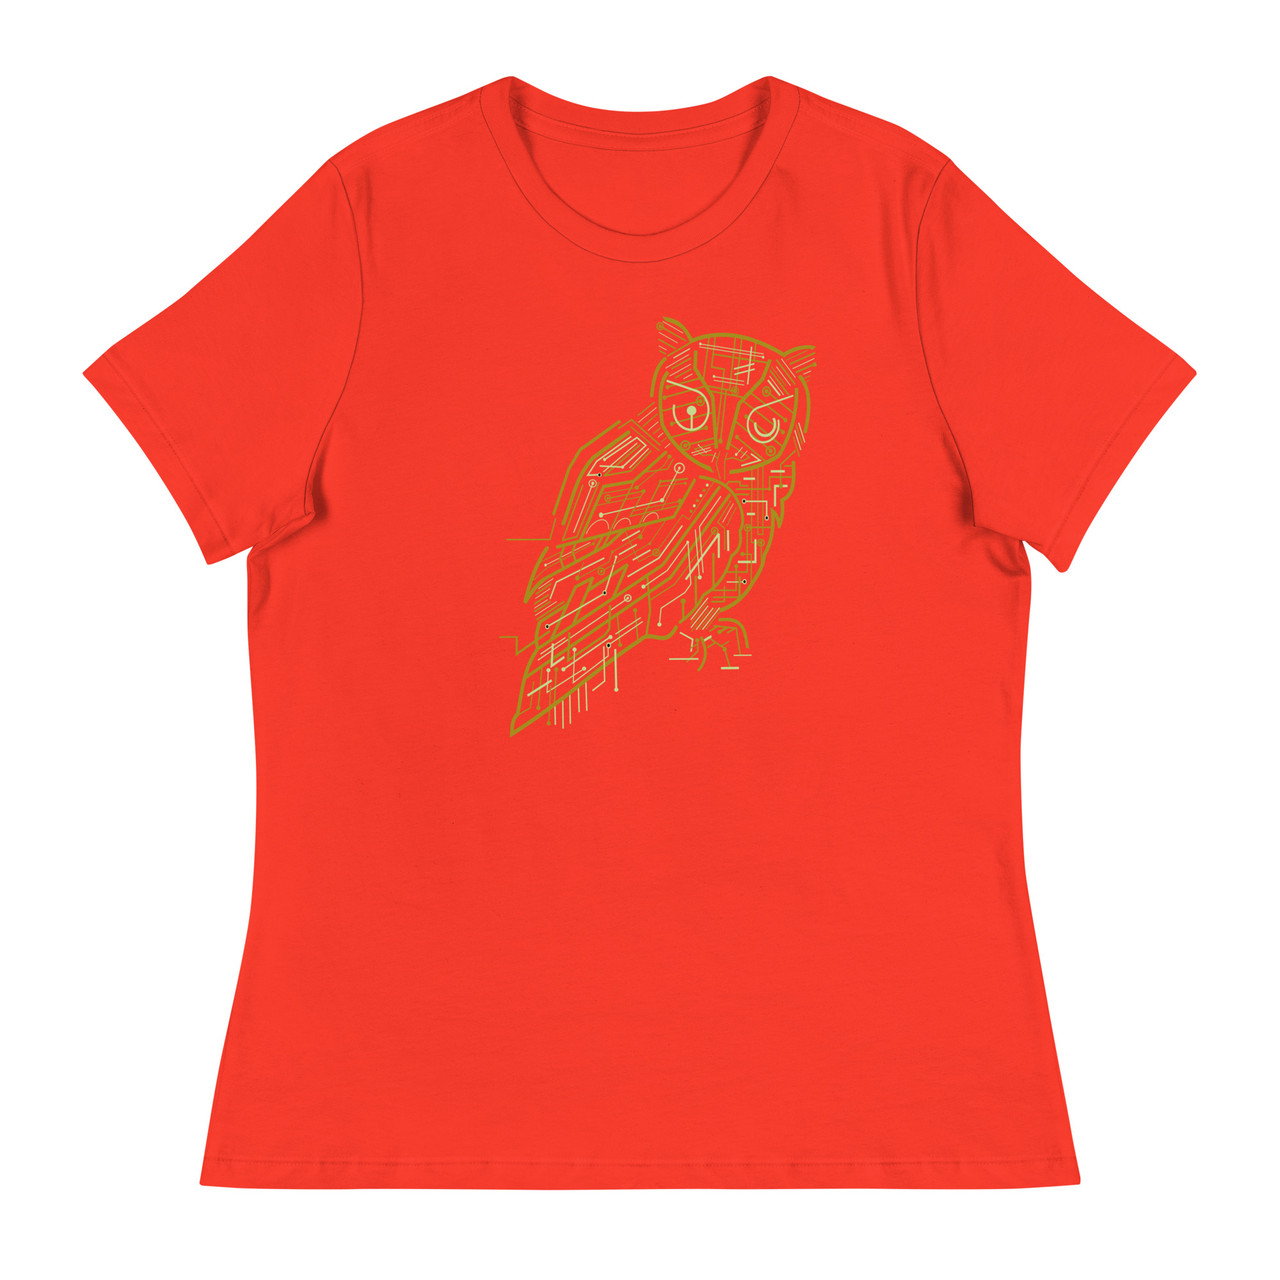 Electric Owl Women's Relaxed T-Shirt - Bella + Canvas 6400 